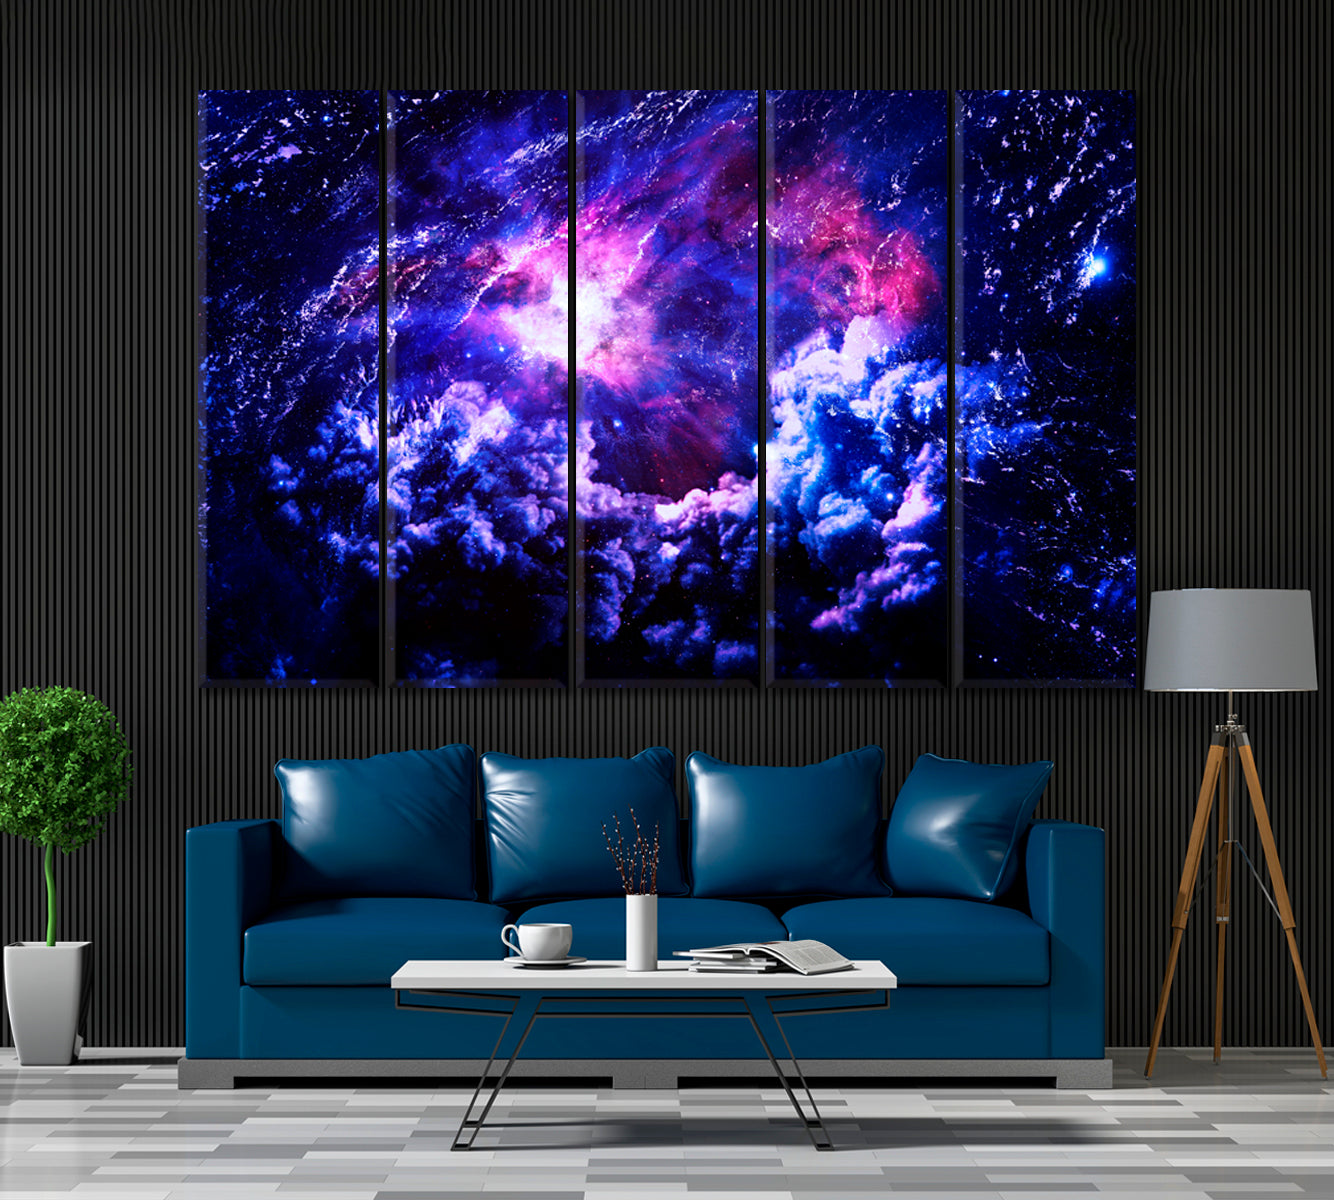 Starry Galaxy Canvas Print ArtLexy 5 Panels 36"x24" inches 